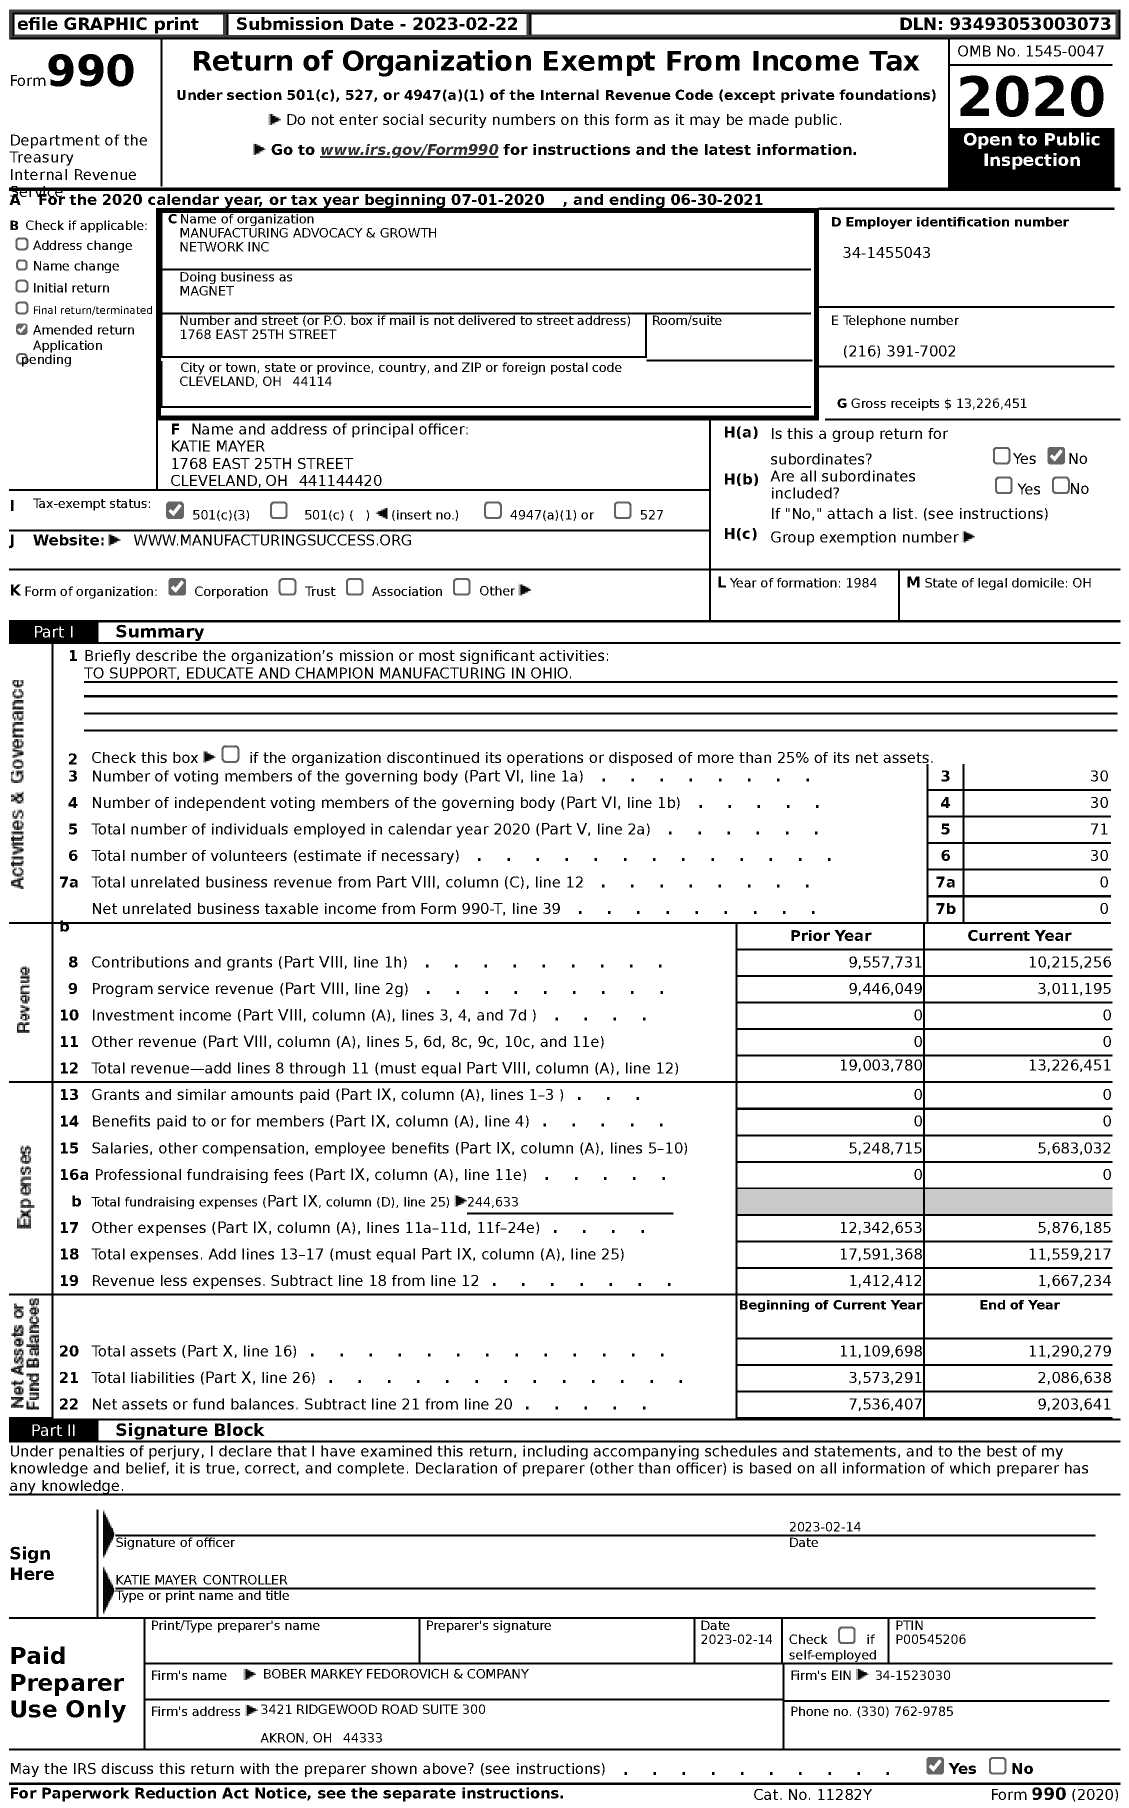 Image of first page of 2020 Form 990 for Magnet / Manufacturing Advocacy & Growth Network Inc